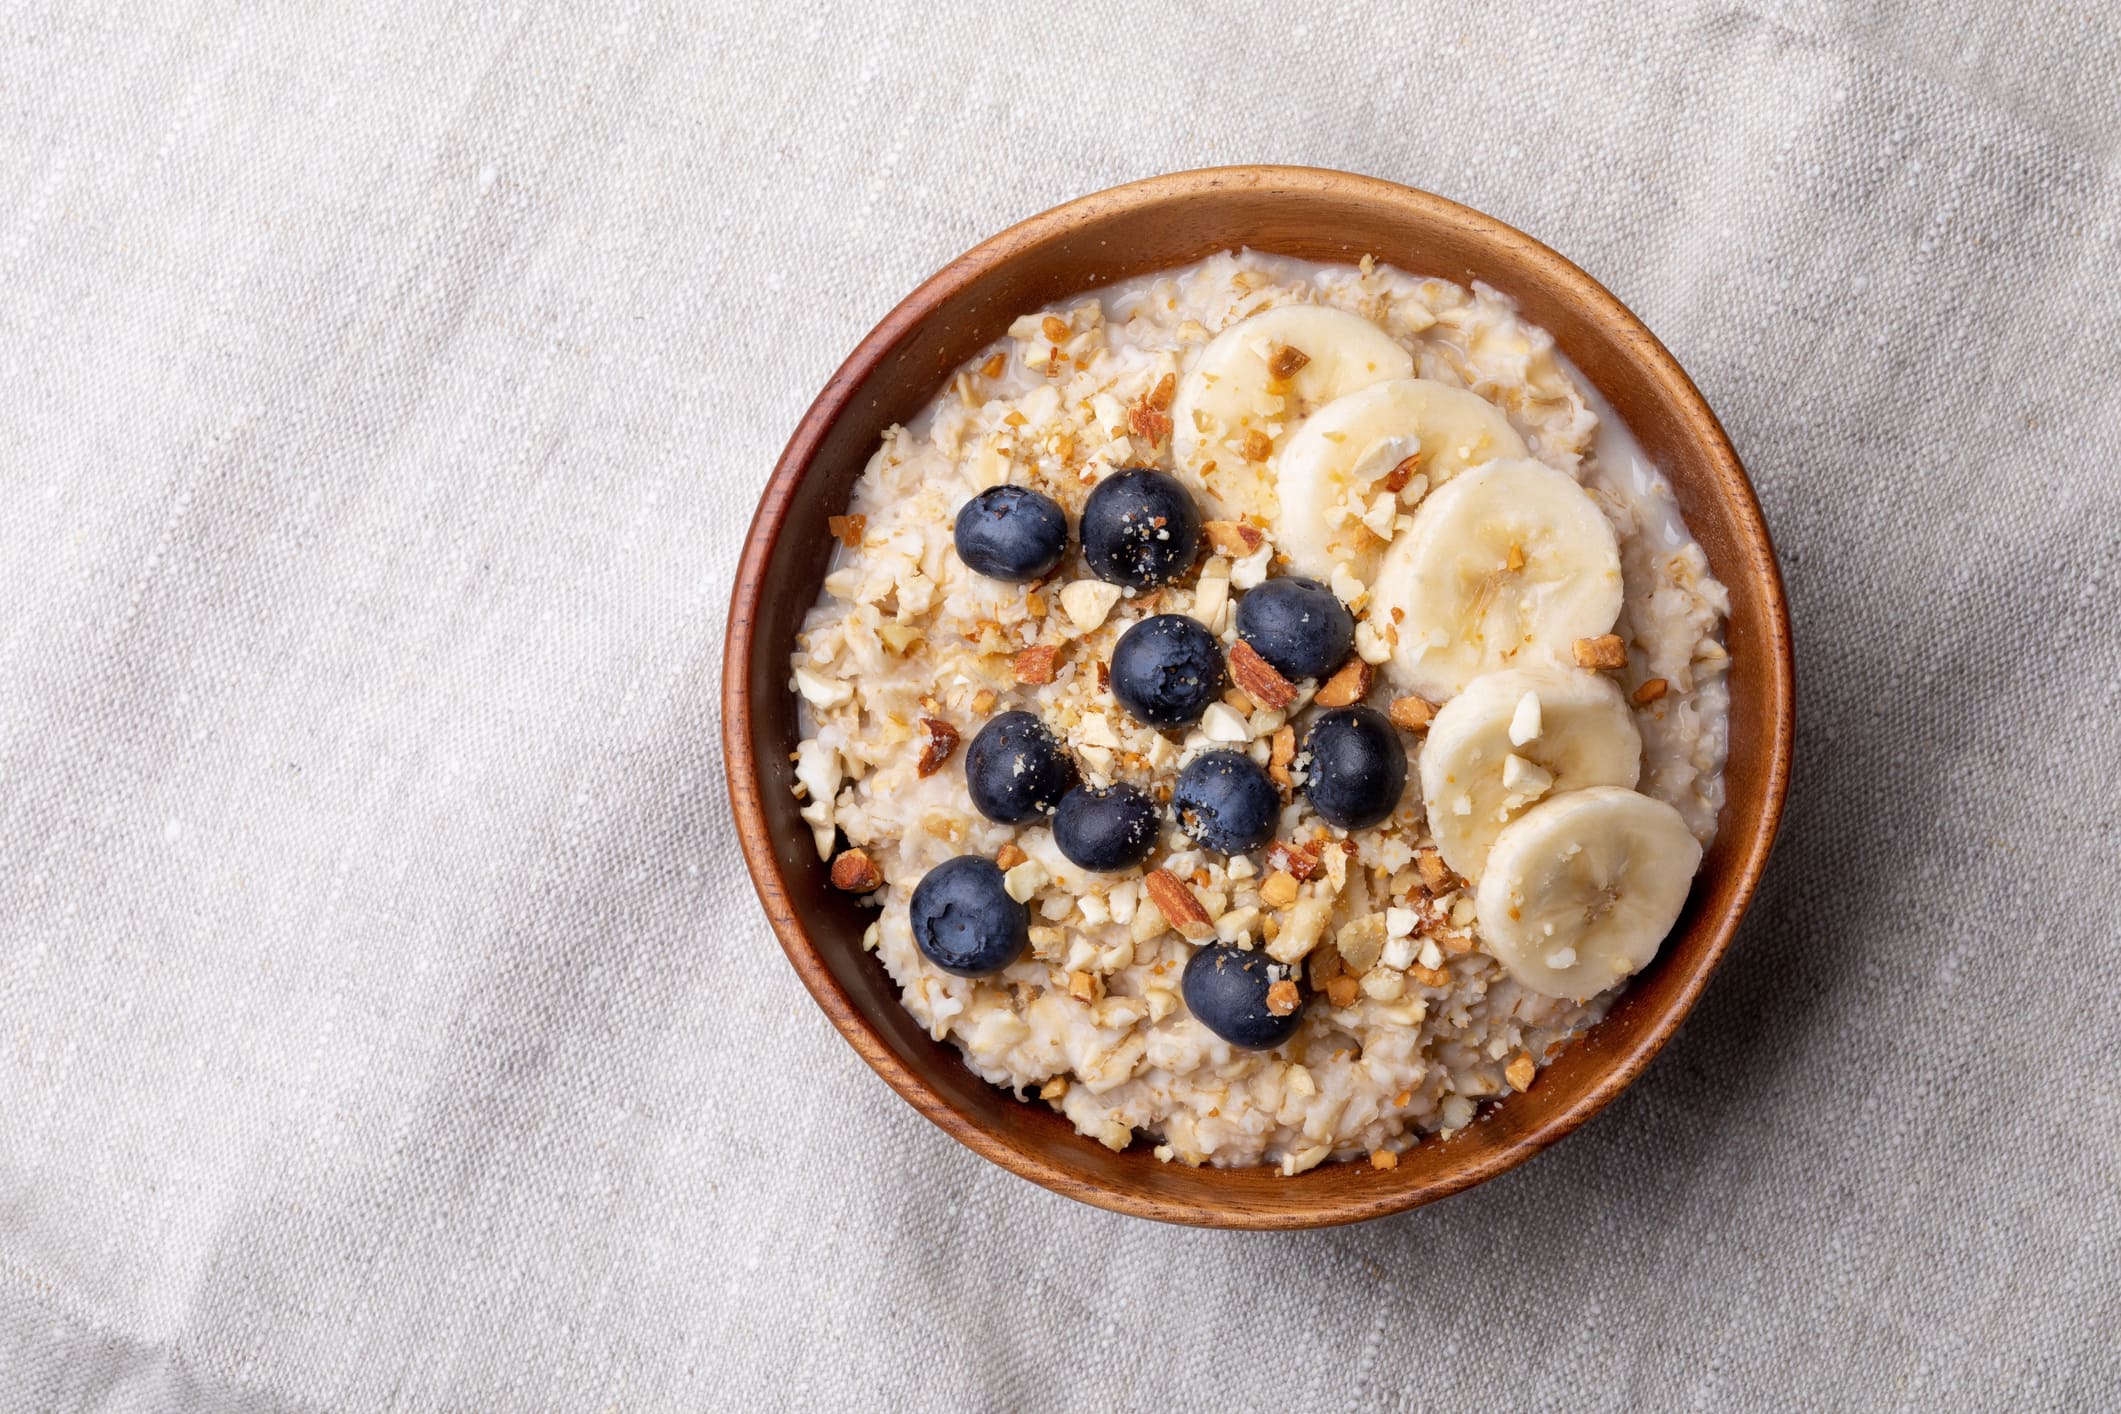 oatmeal with bananas, blueberries and almonds.